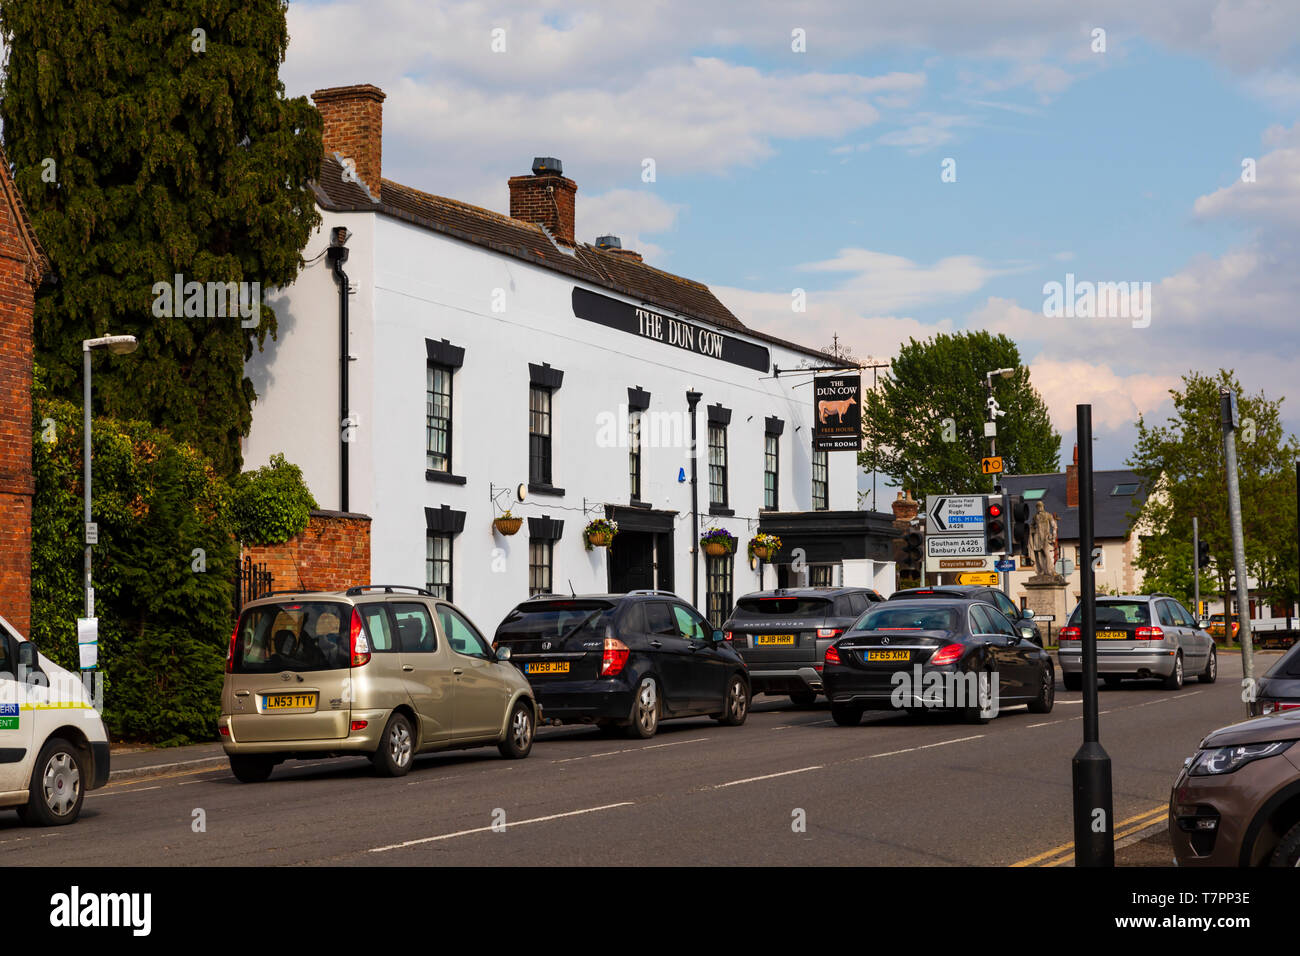 The Dun Cow old coaching inn on the crossroads of the London - Birmingham, and Oxford - Leicester coach roads. Dunchurch, near Rugby, Warwickshire Stock Photo